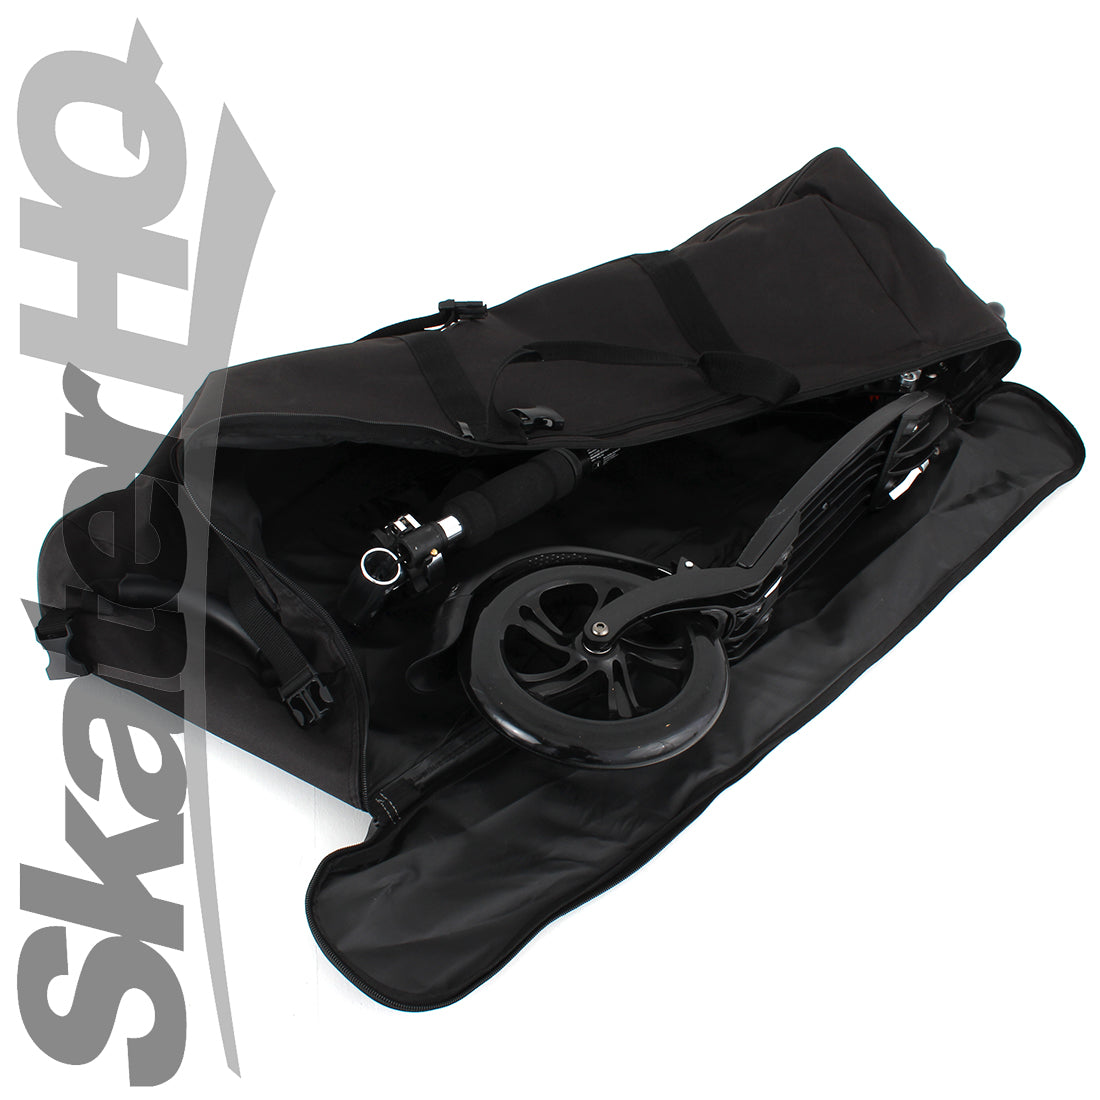 Scooter Wheelie Carrying Bag - Black Scooter Accessories